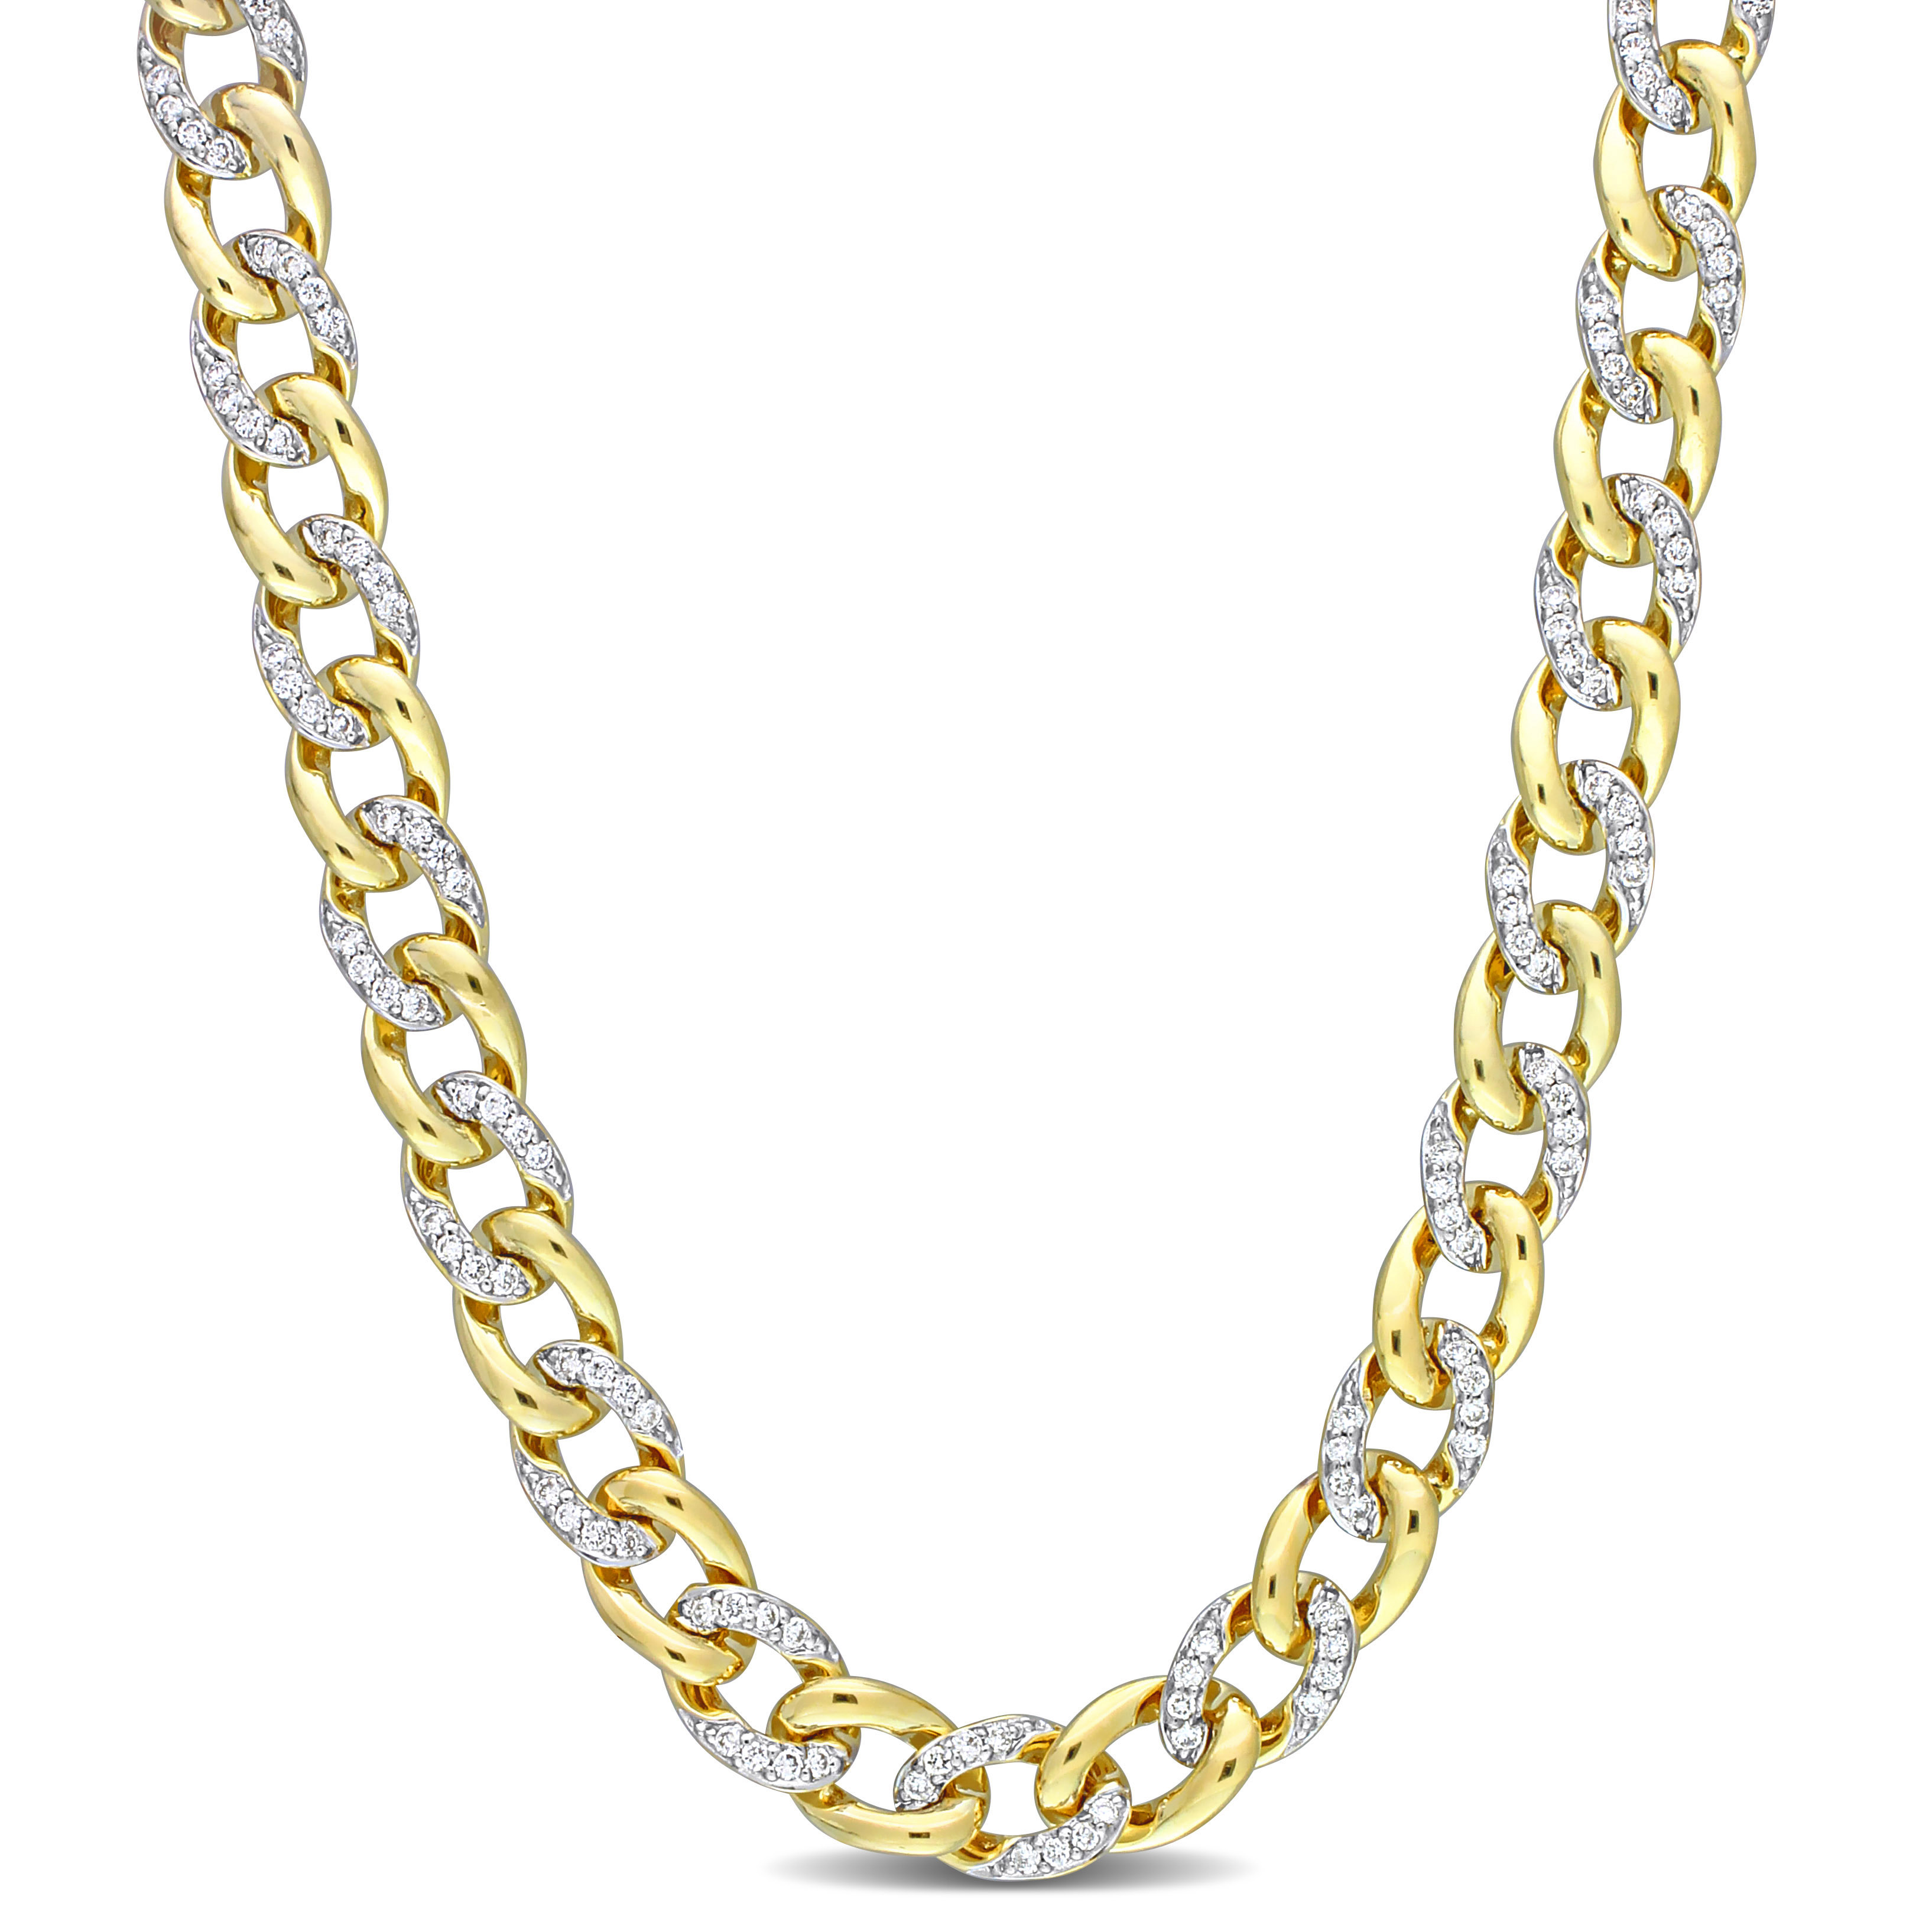 5.9mm 1 5/8 CT TW Diamond Curb Link Necklace in 14k Yellow Gold - 19.5 in